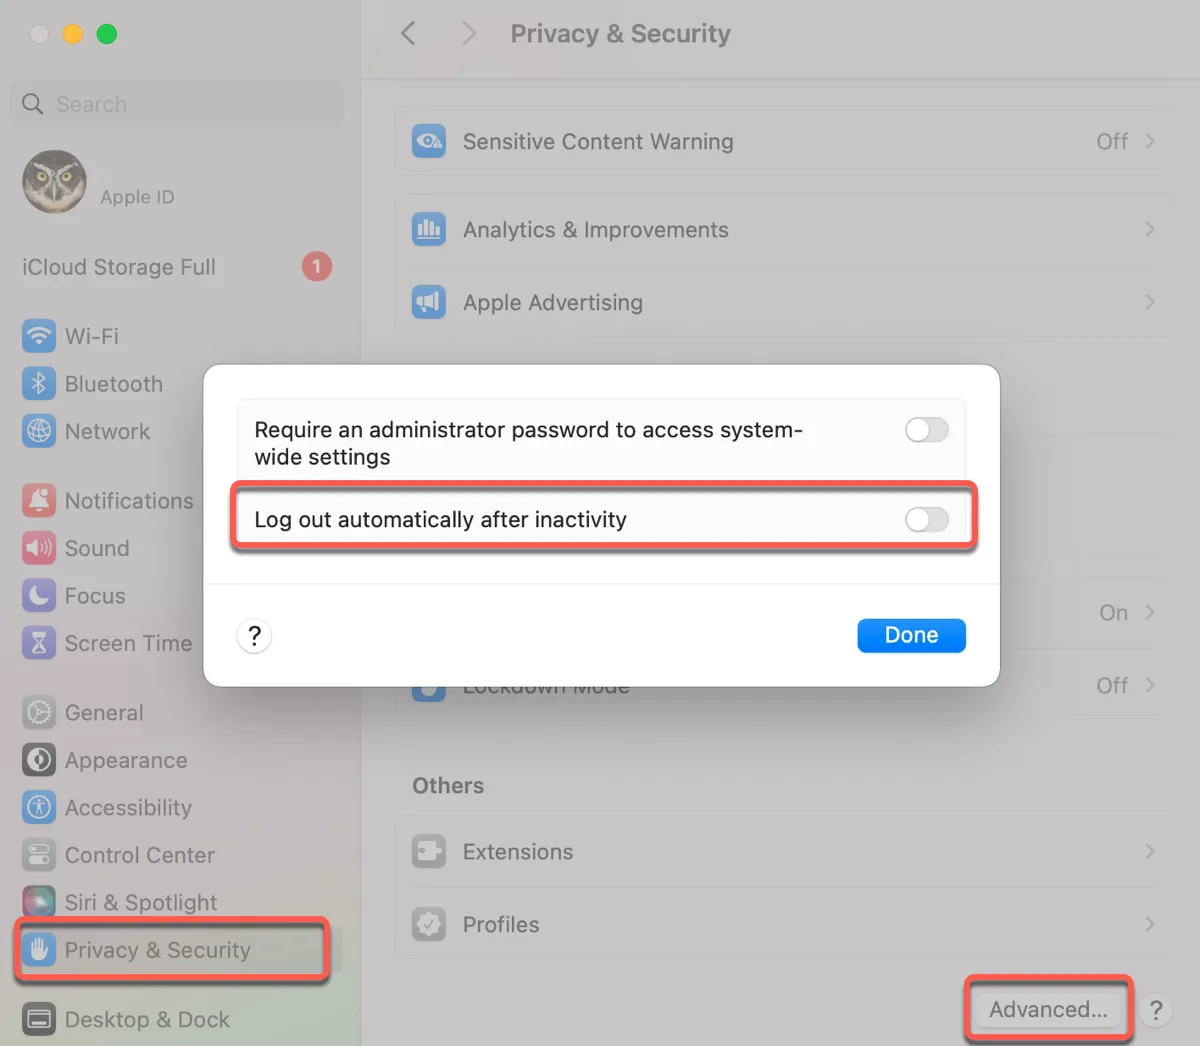 Disable the option Log out automatically after inactivity to stop Mac from asking for password to enable Touch ID